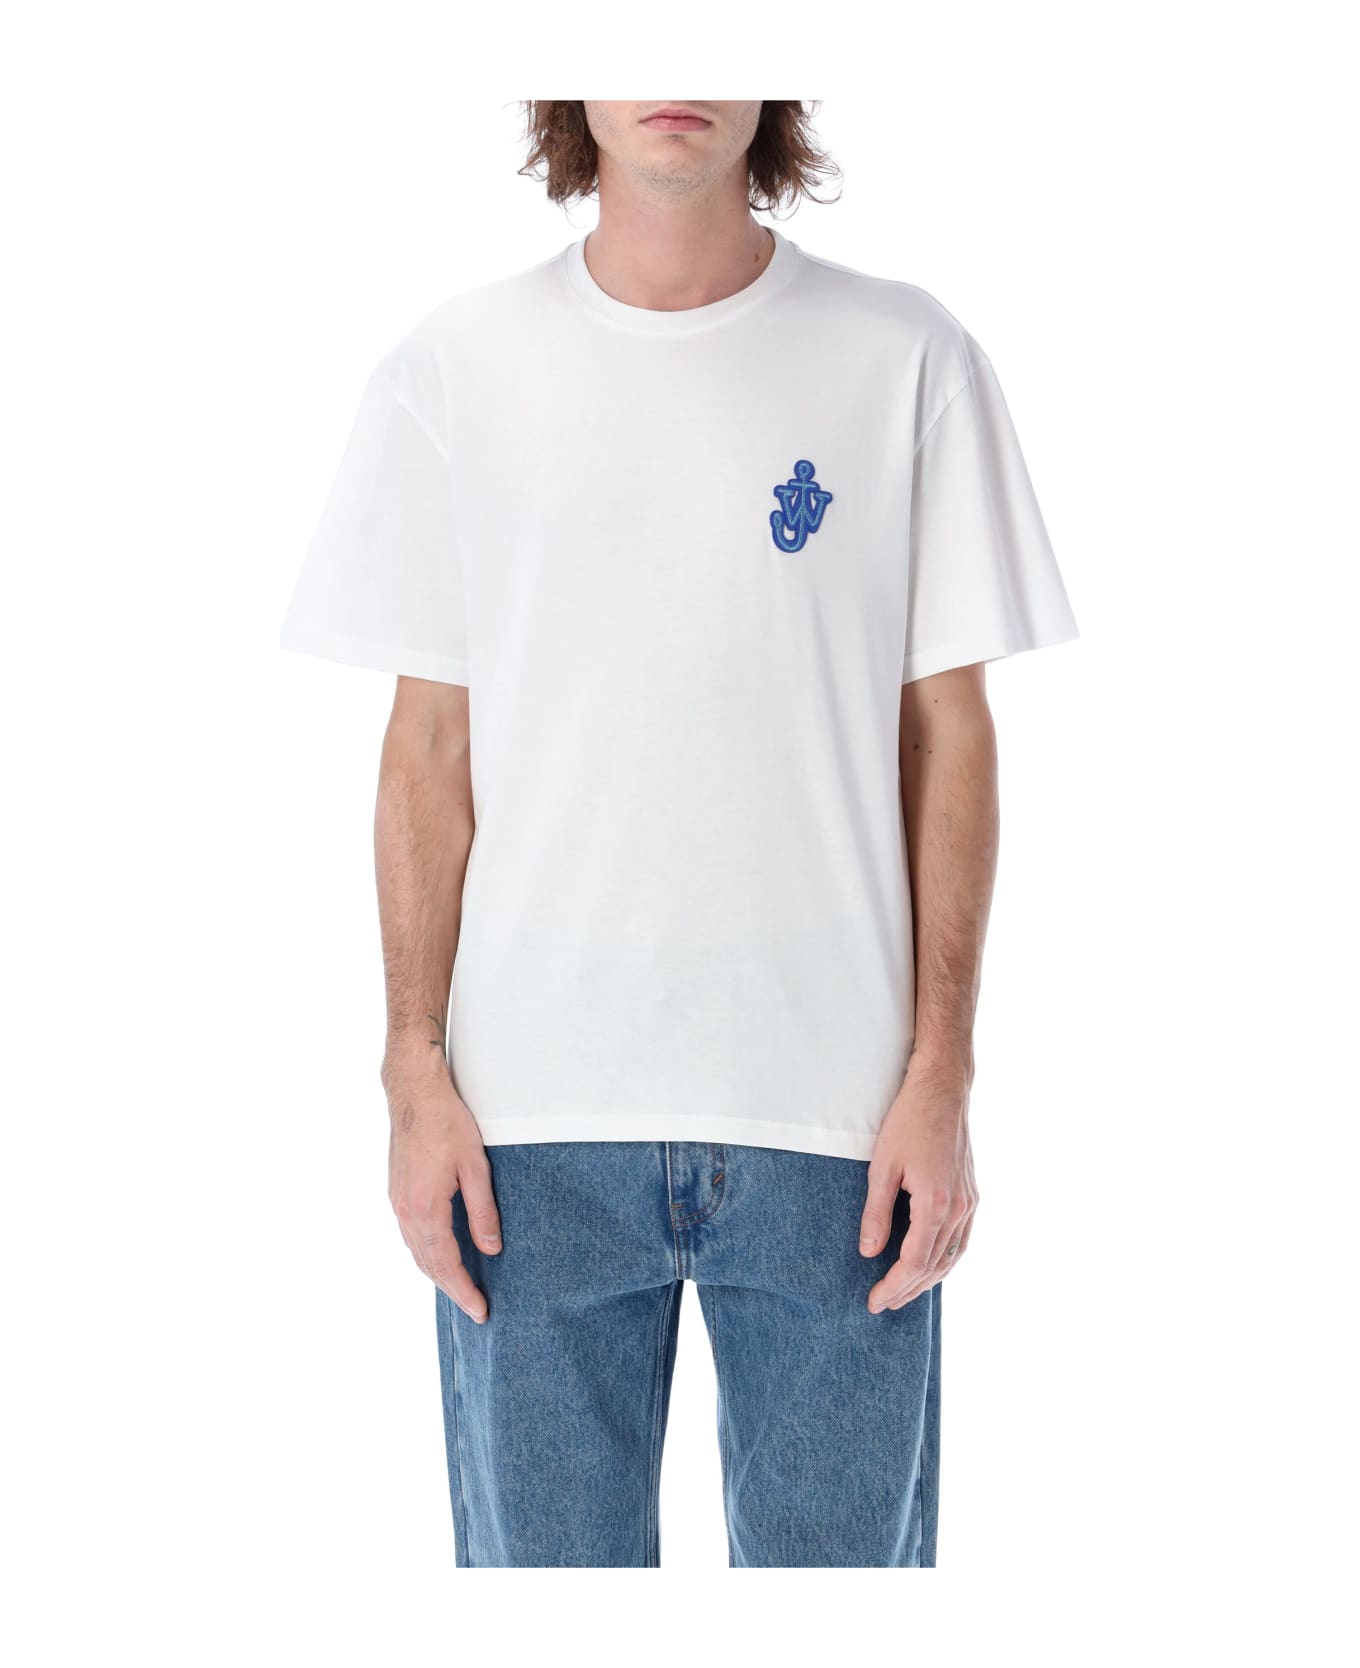 J.W. Anderson Anchor Patch T-shirt - WHITE シャツ